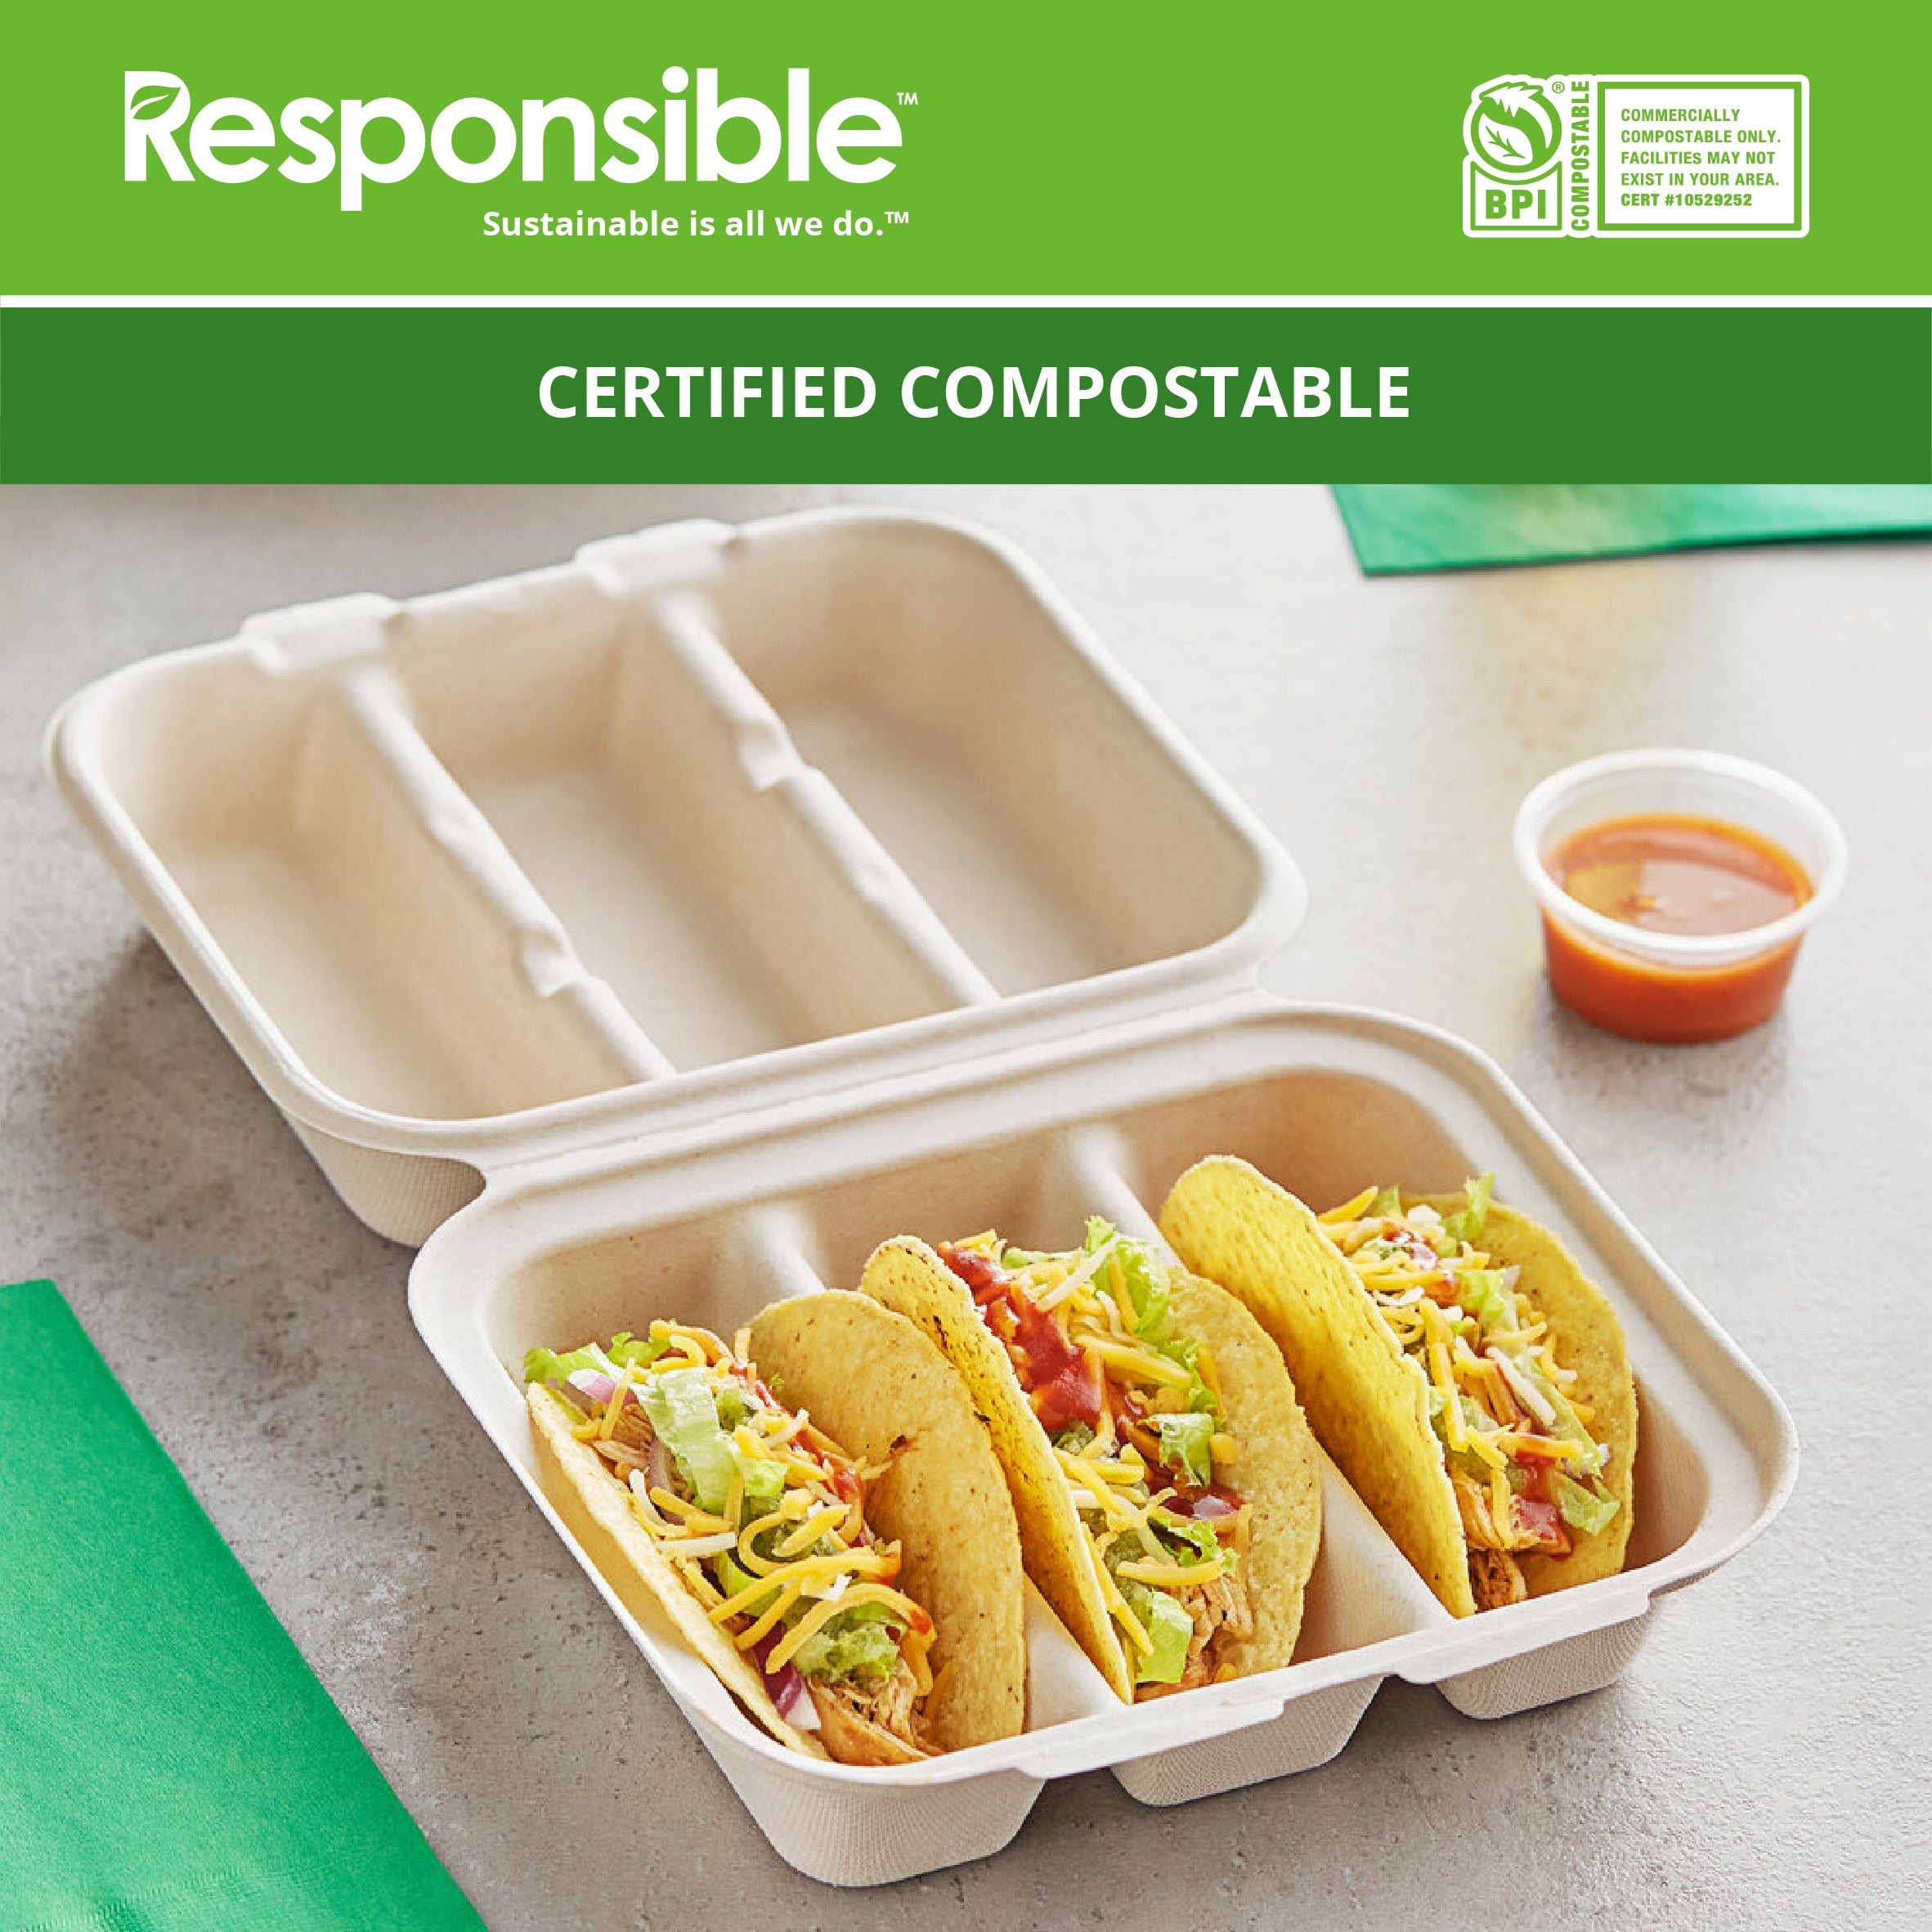 Compostable 8 x 7 Inch 3-Compaerment Molded Fiber Hinged Containers Brown